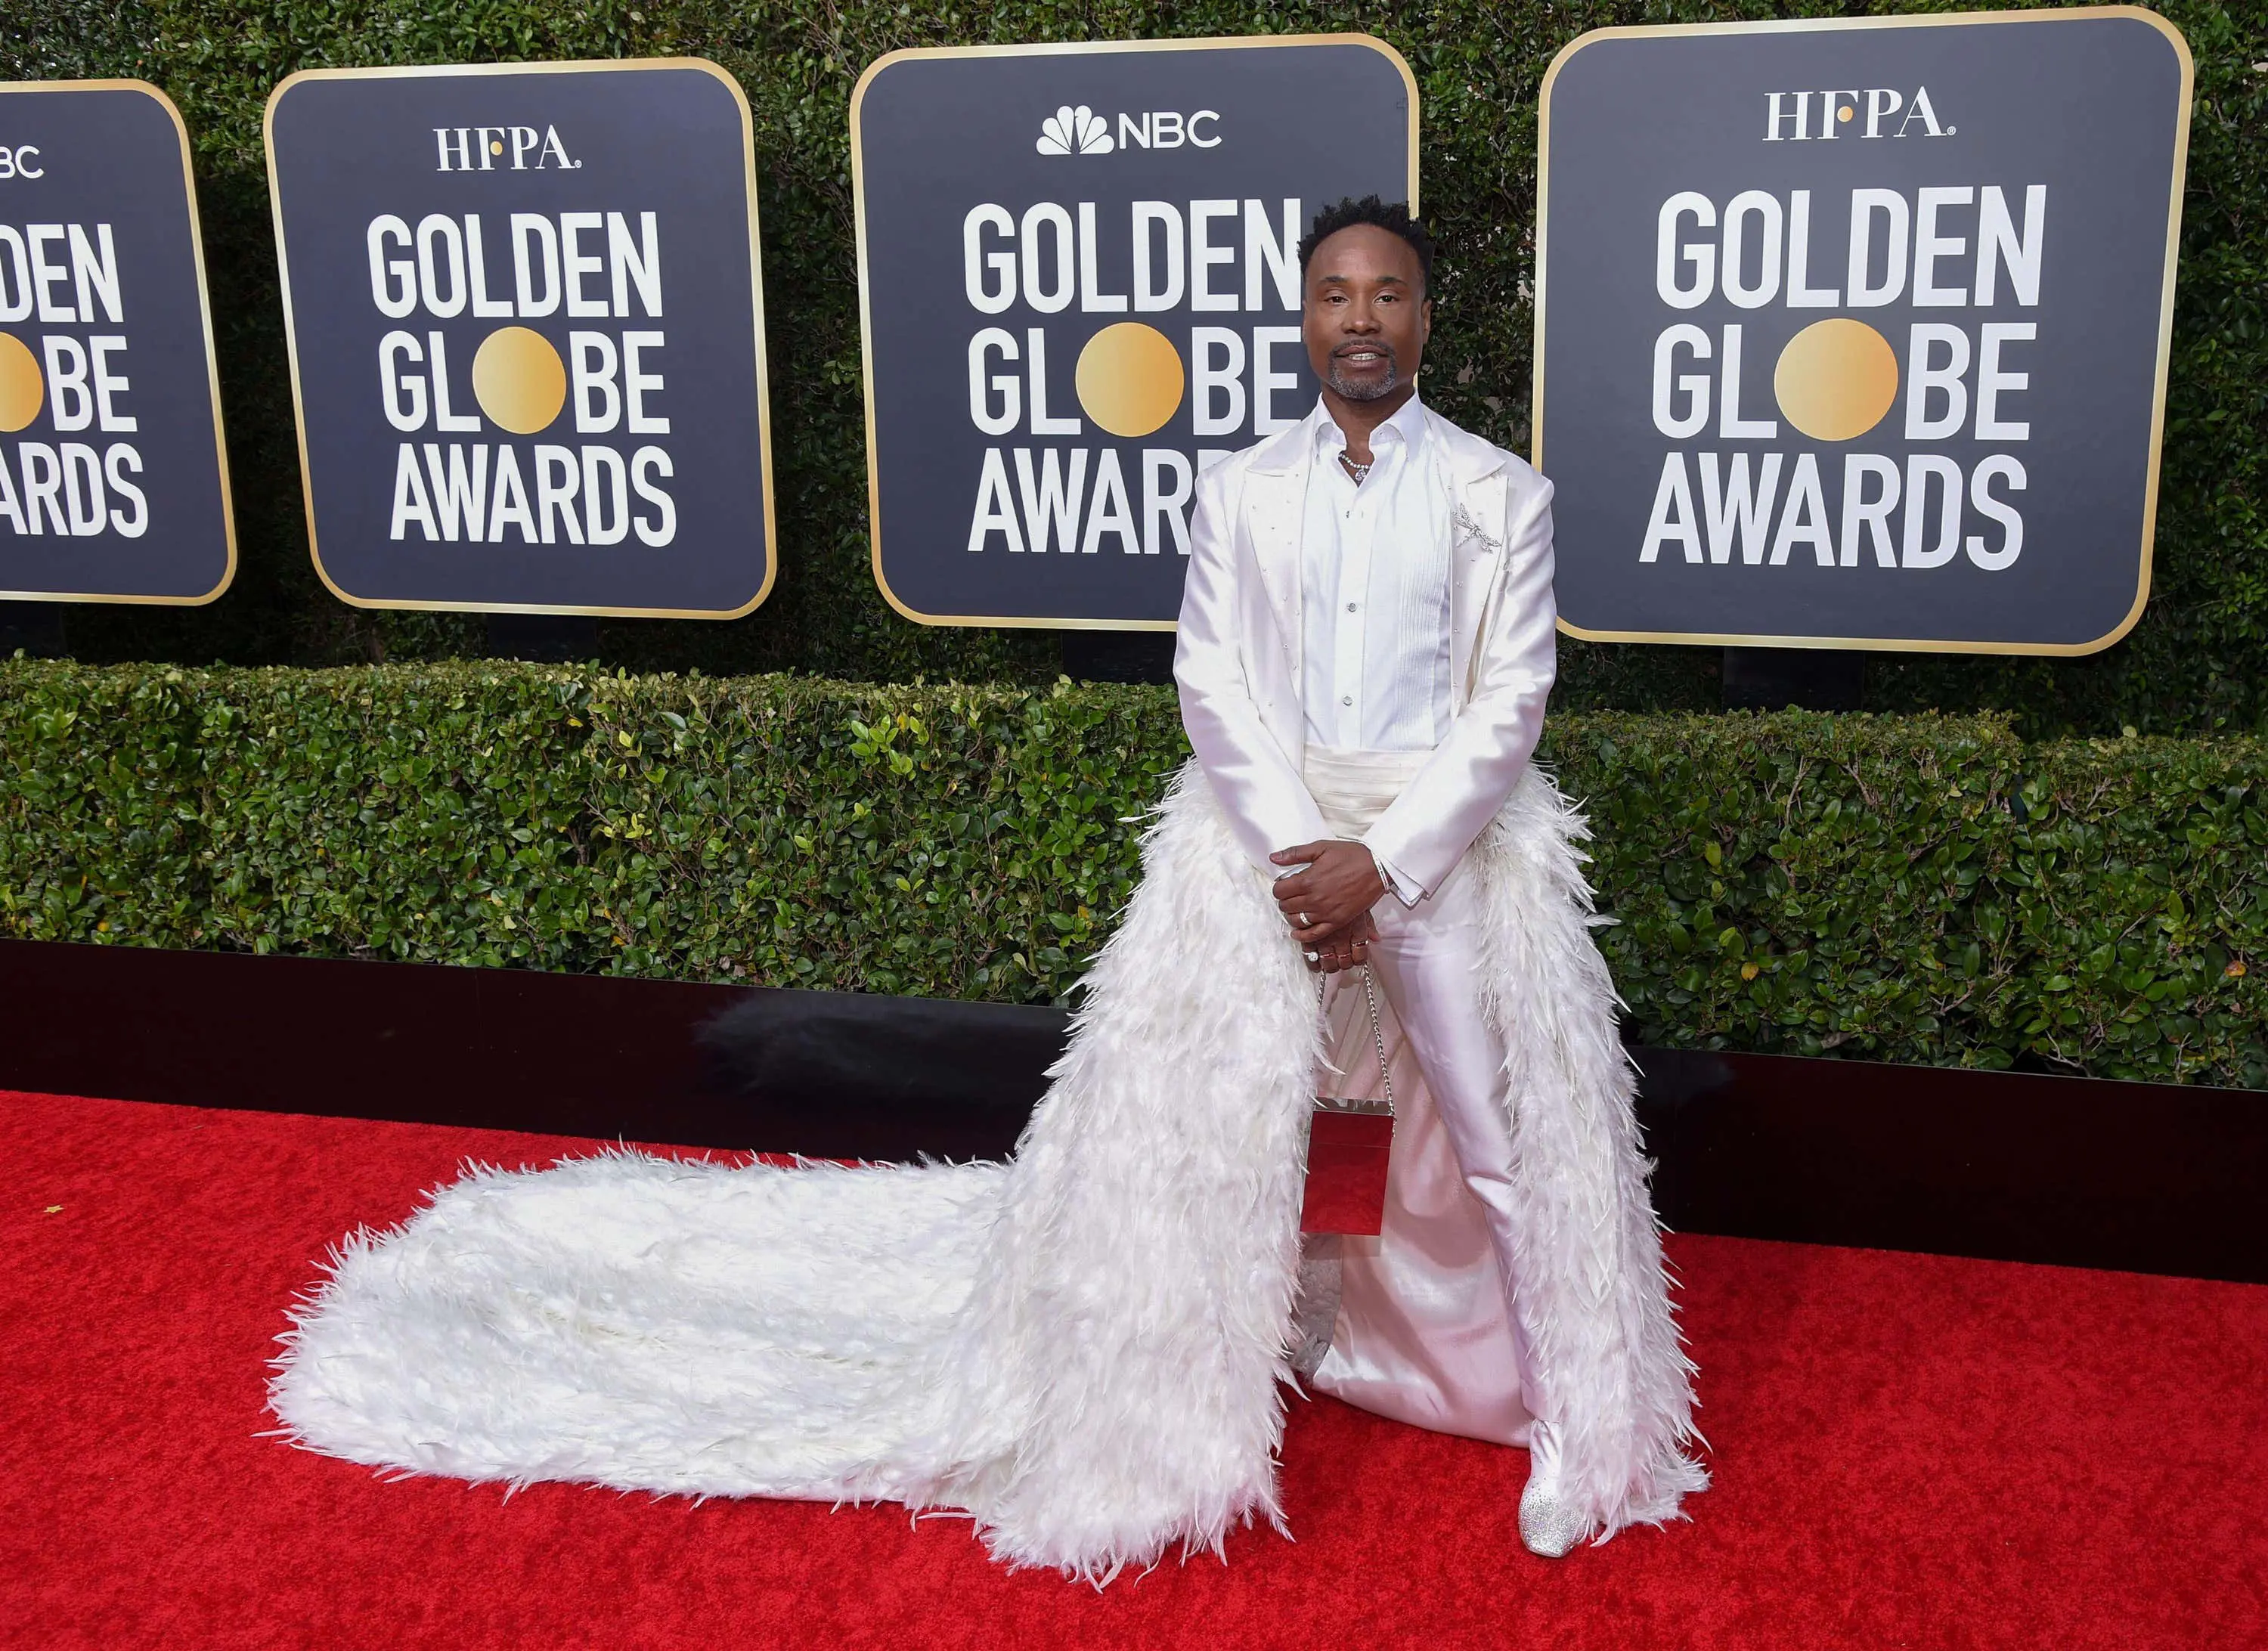 Billy porter on the red carpet at the golden globe awards scaled